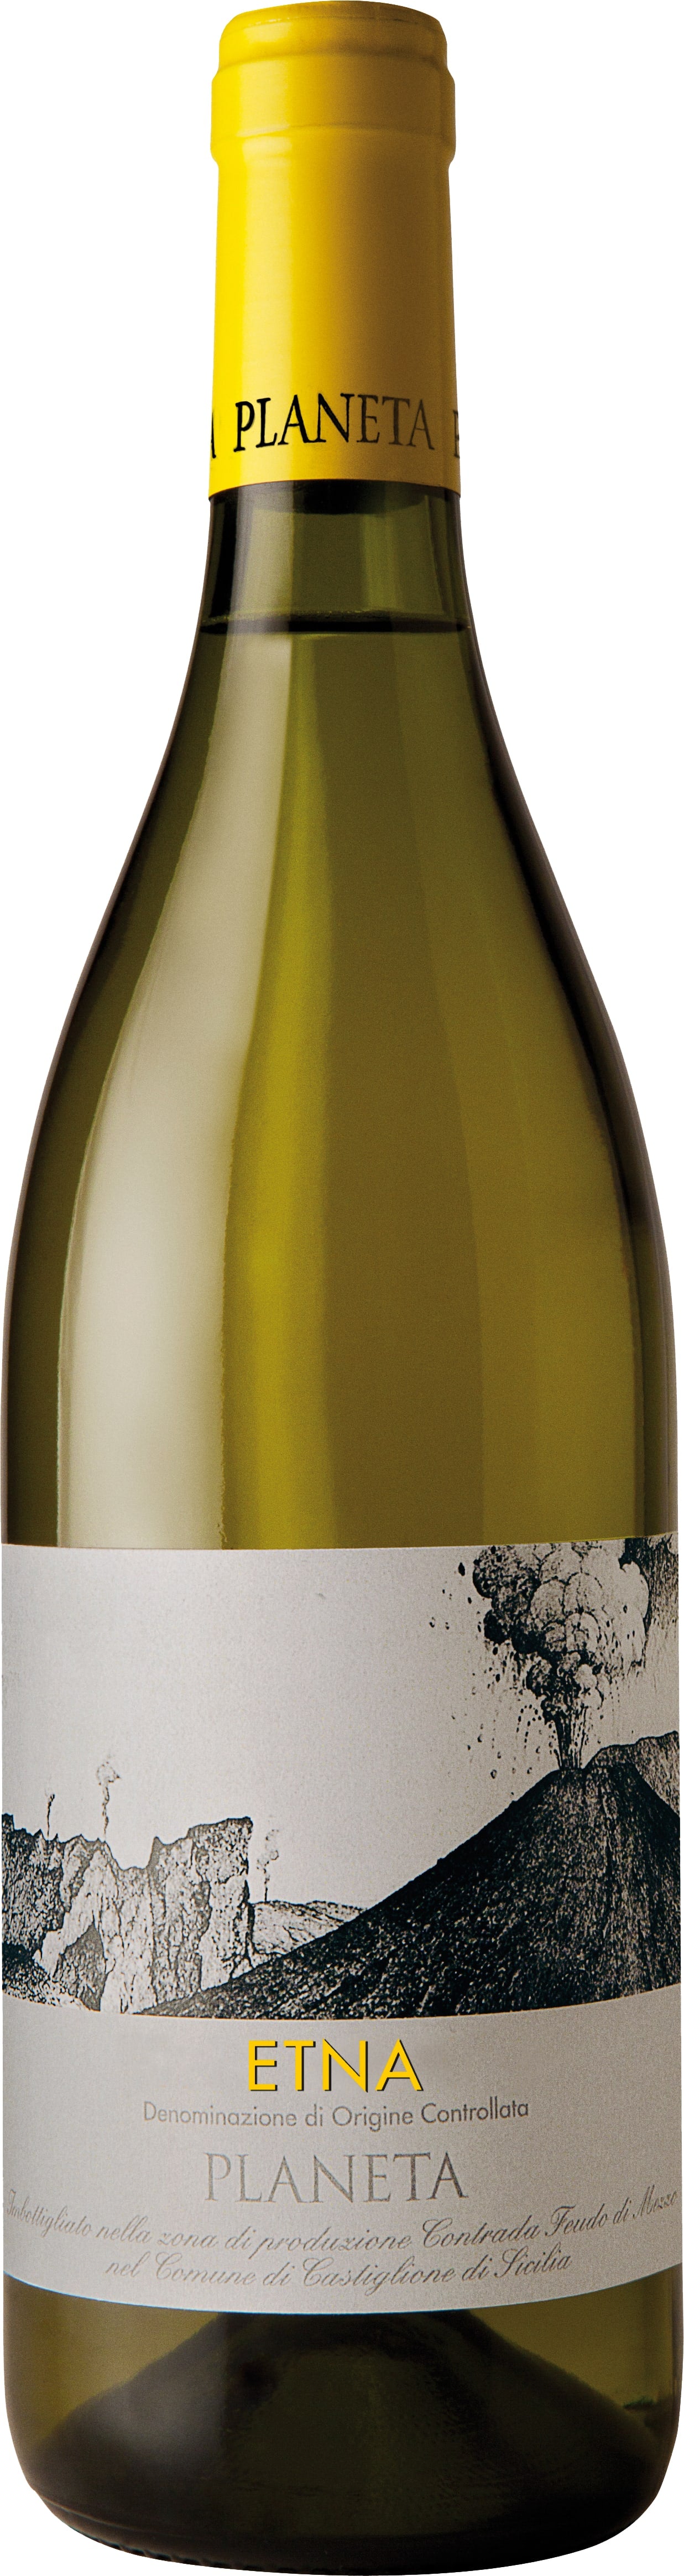 Planeta Etna Bianco 2022 75cl - Buy Planeta Wines from GREAT WINES DIRECT wine shop